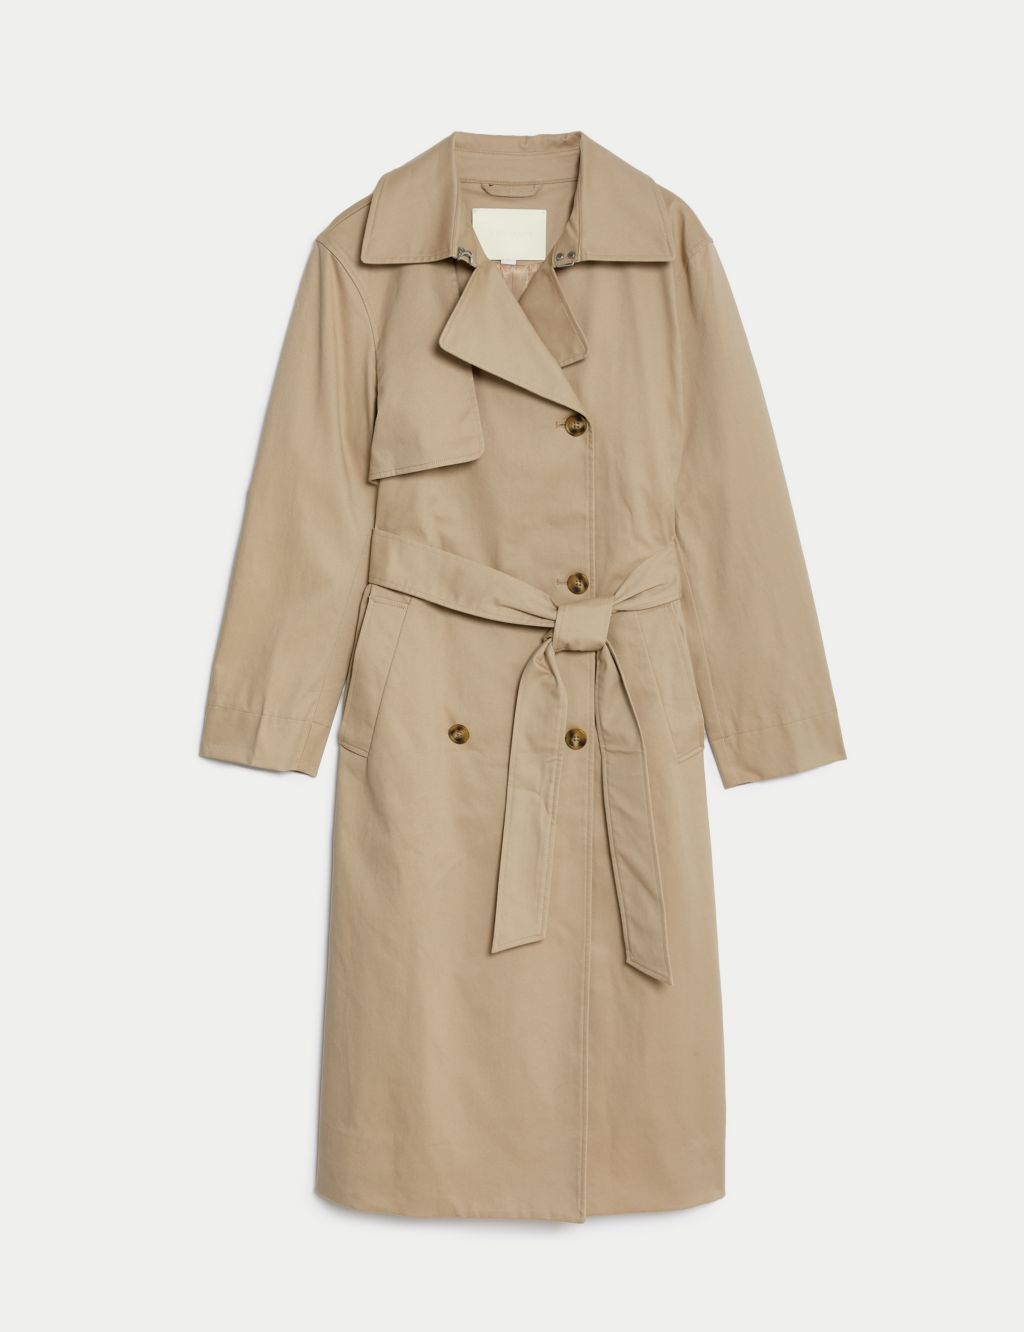 Cotton Rich Belted Longline Trench Coat image 2